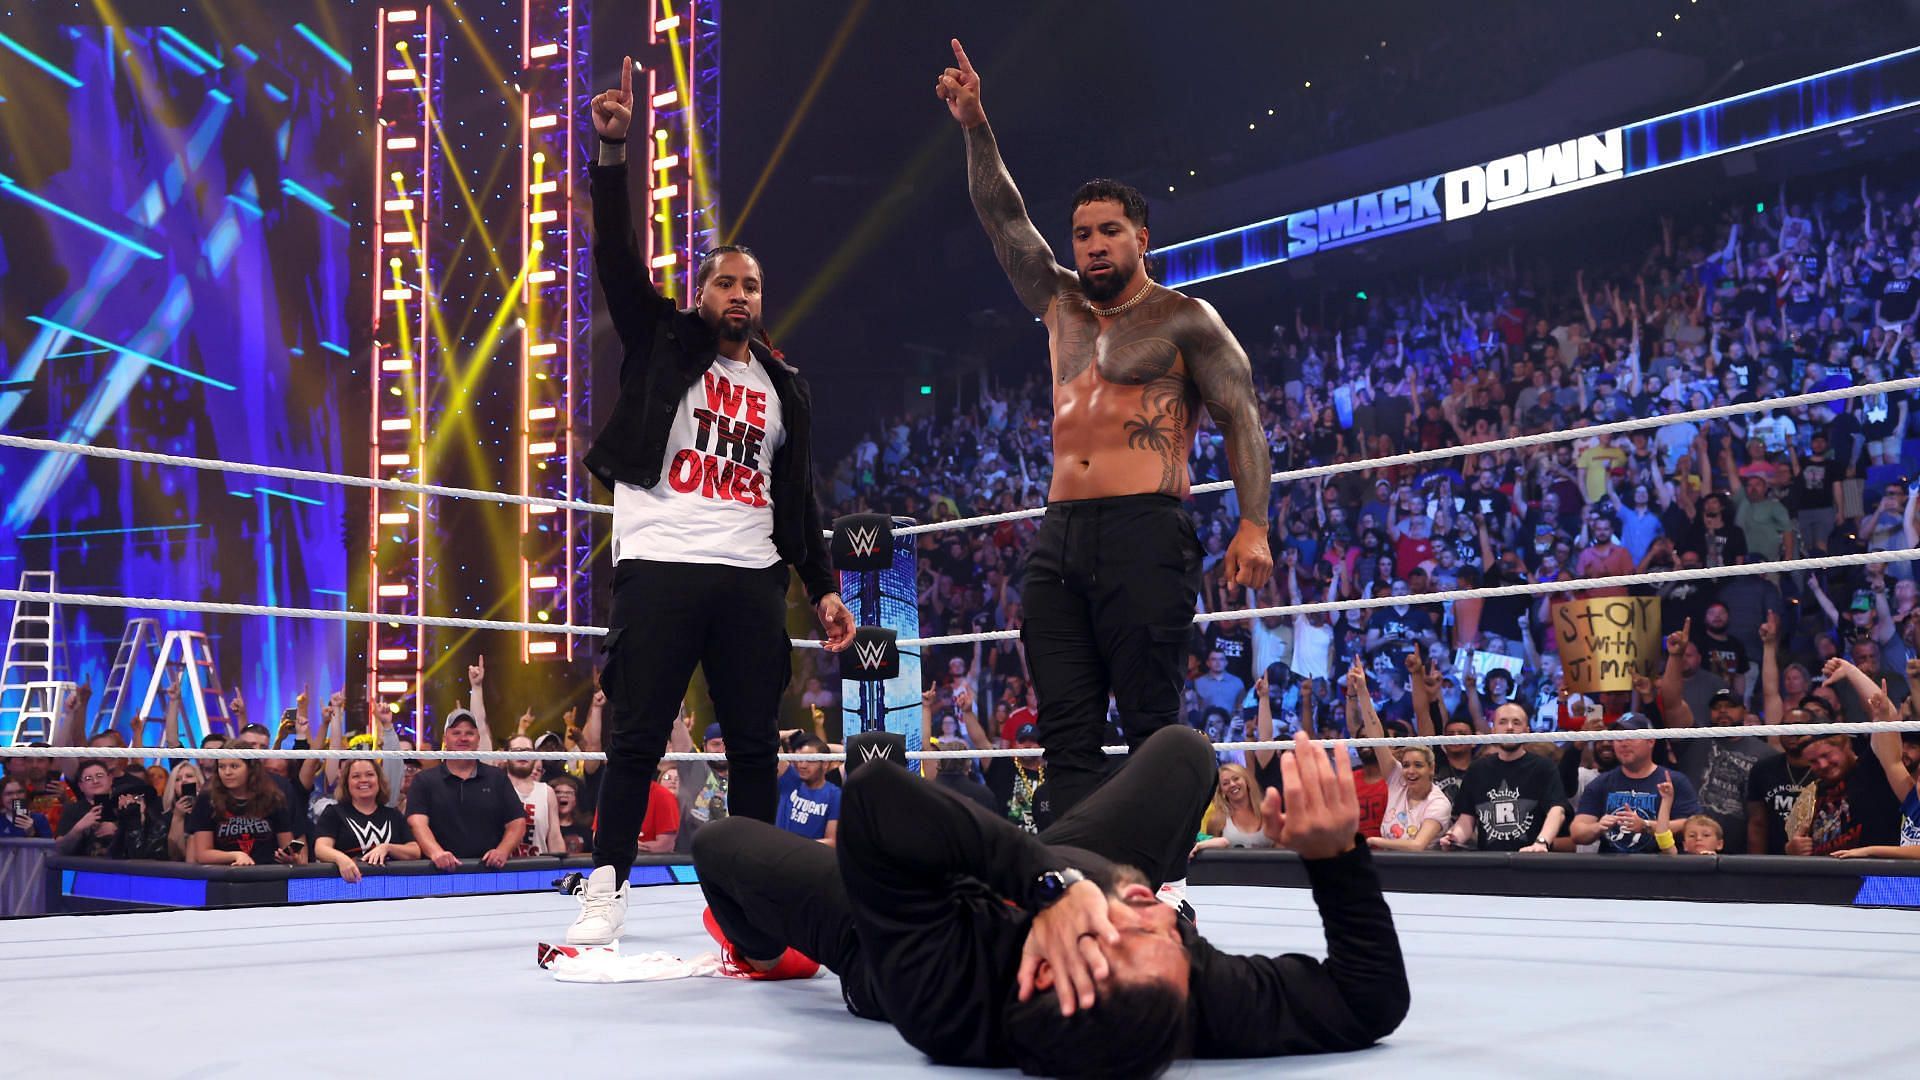 Jey Uso superkicked Roman Reigns on SmackDown.